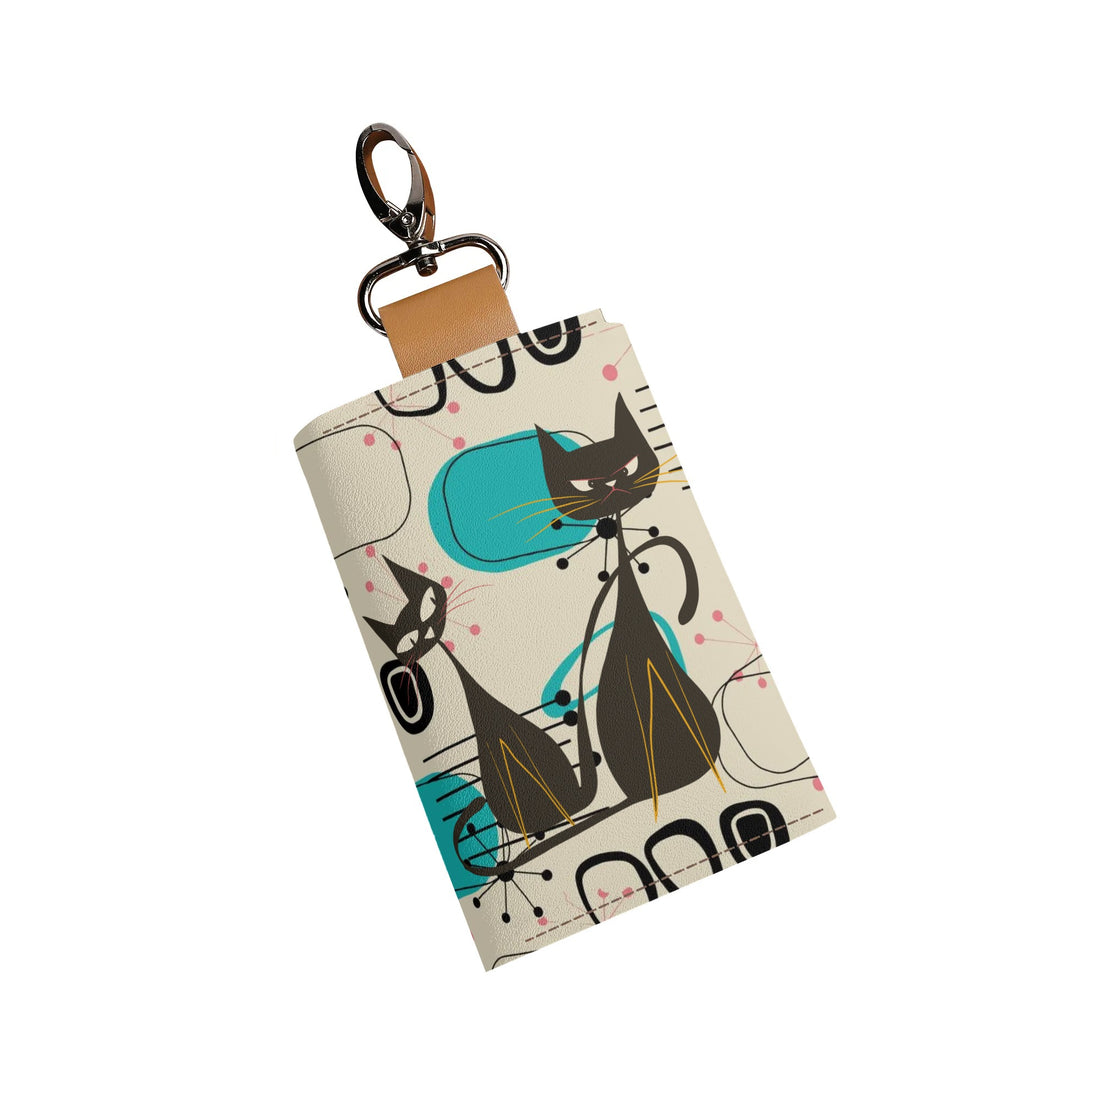 Mid Century Modern Atomic Cat Keychain Purse, Retro Pink, Turquoise, and Black Keychain Wallet